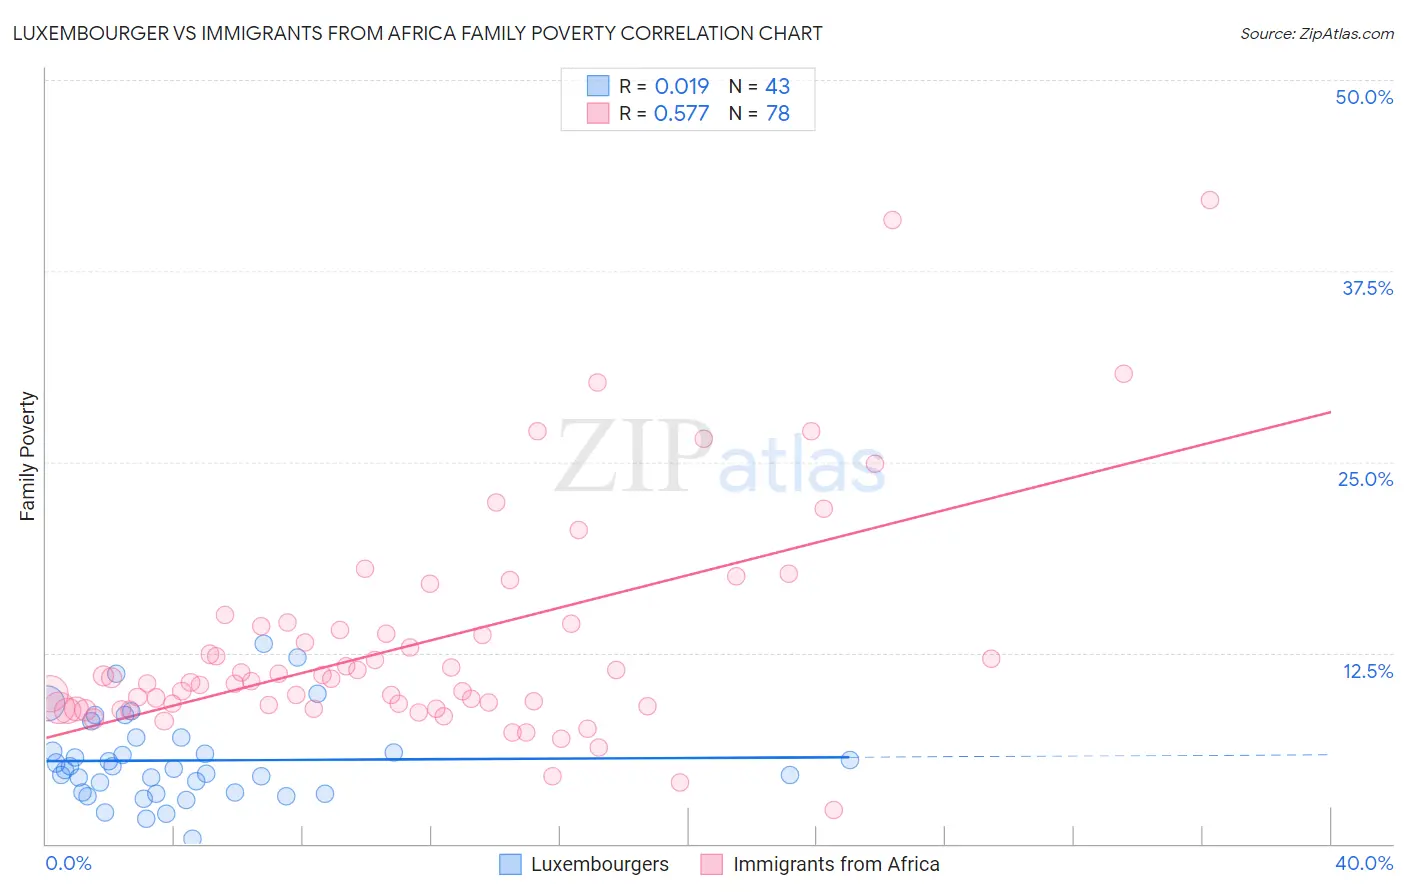 Luxembourger vs Immigrants from Africa Family Poverty